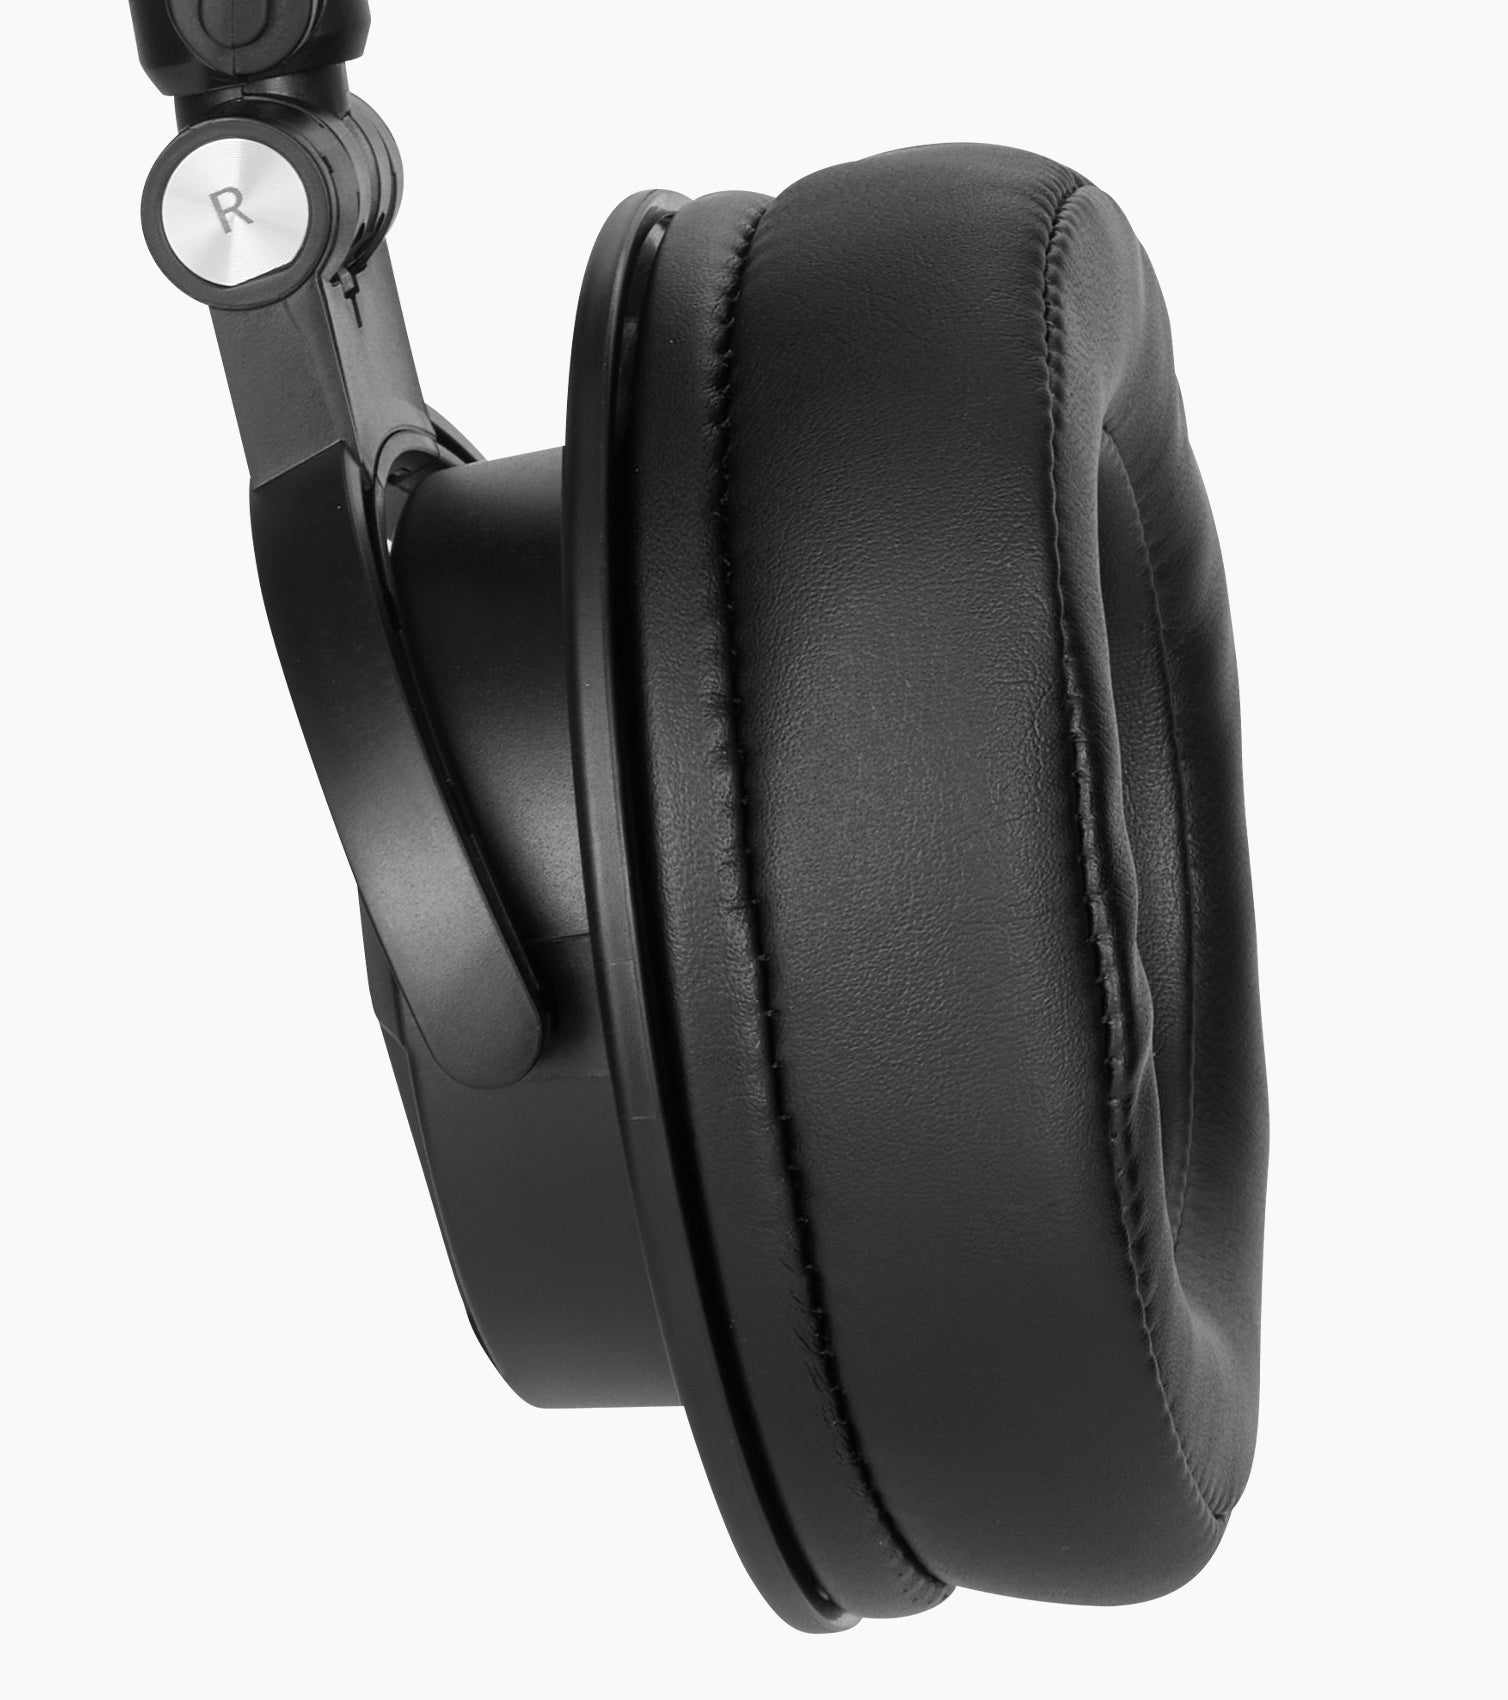 LyxPro Over-Ear Professional Studio Headphones with Sound Isolation - Cover